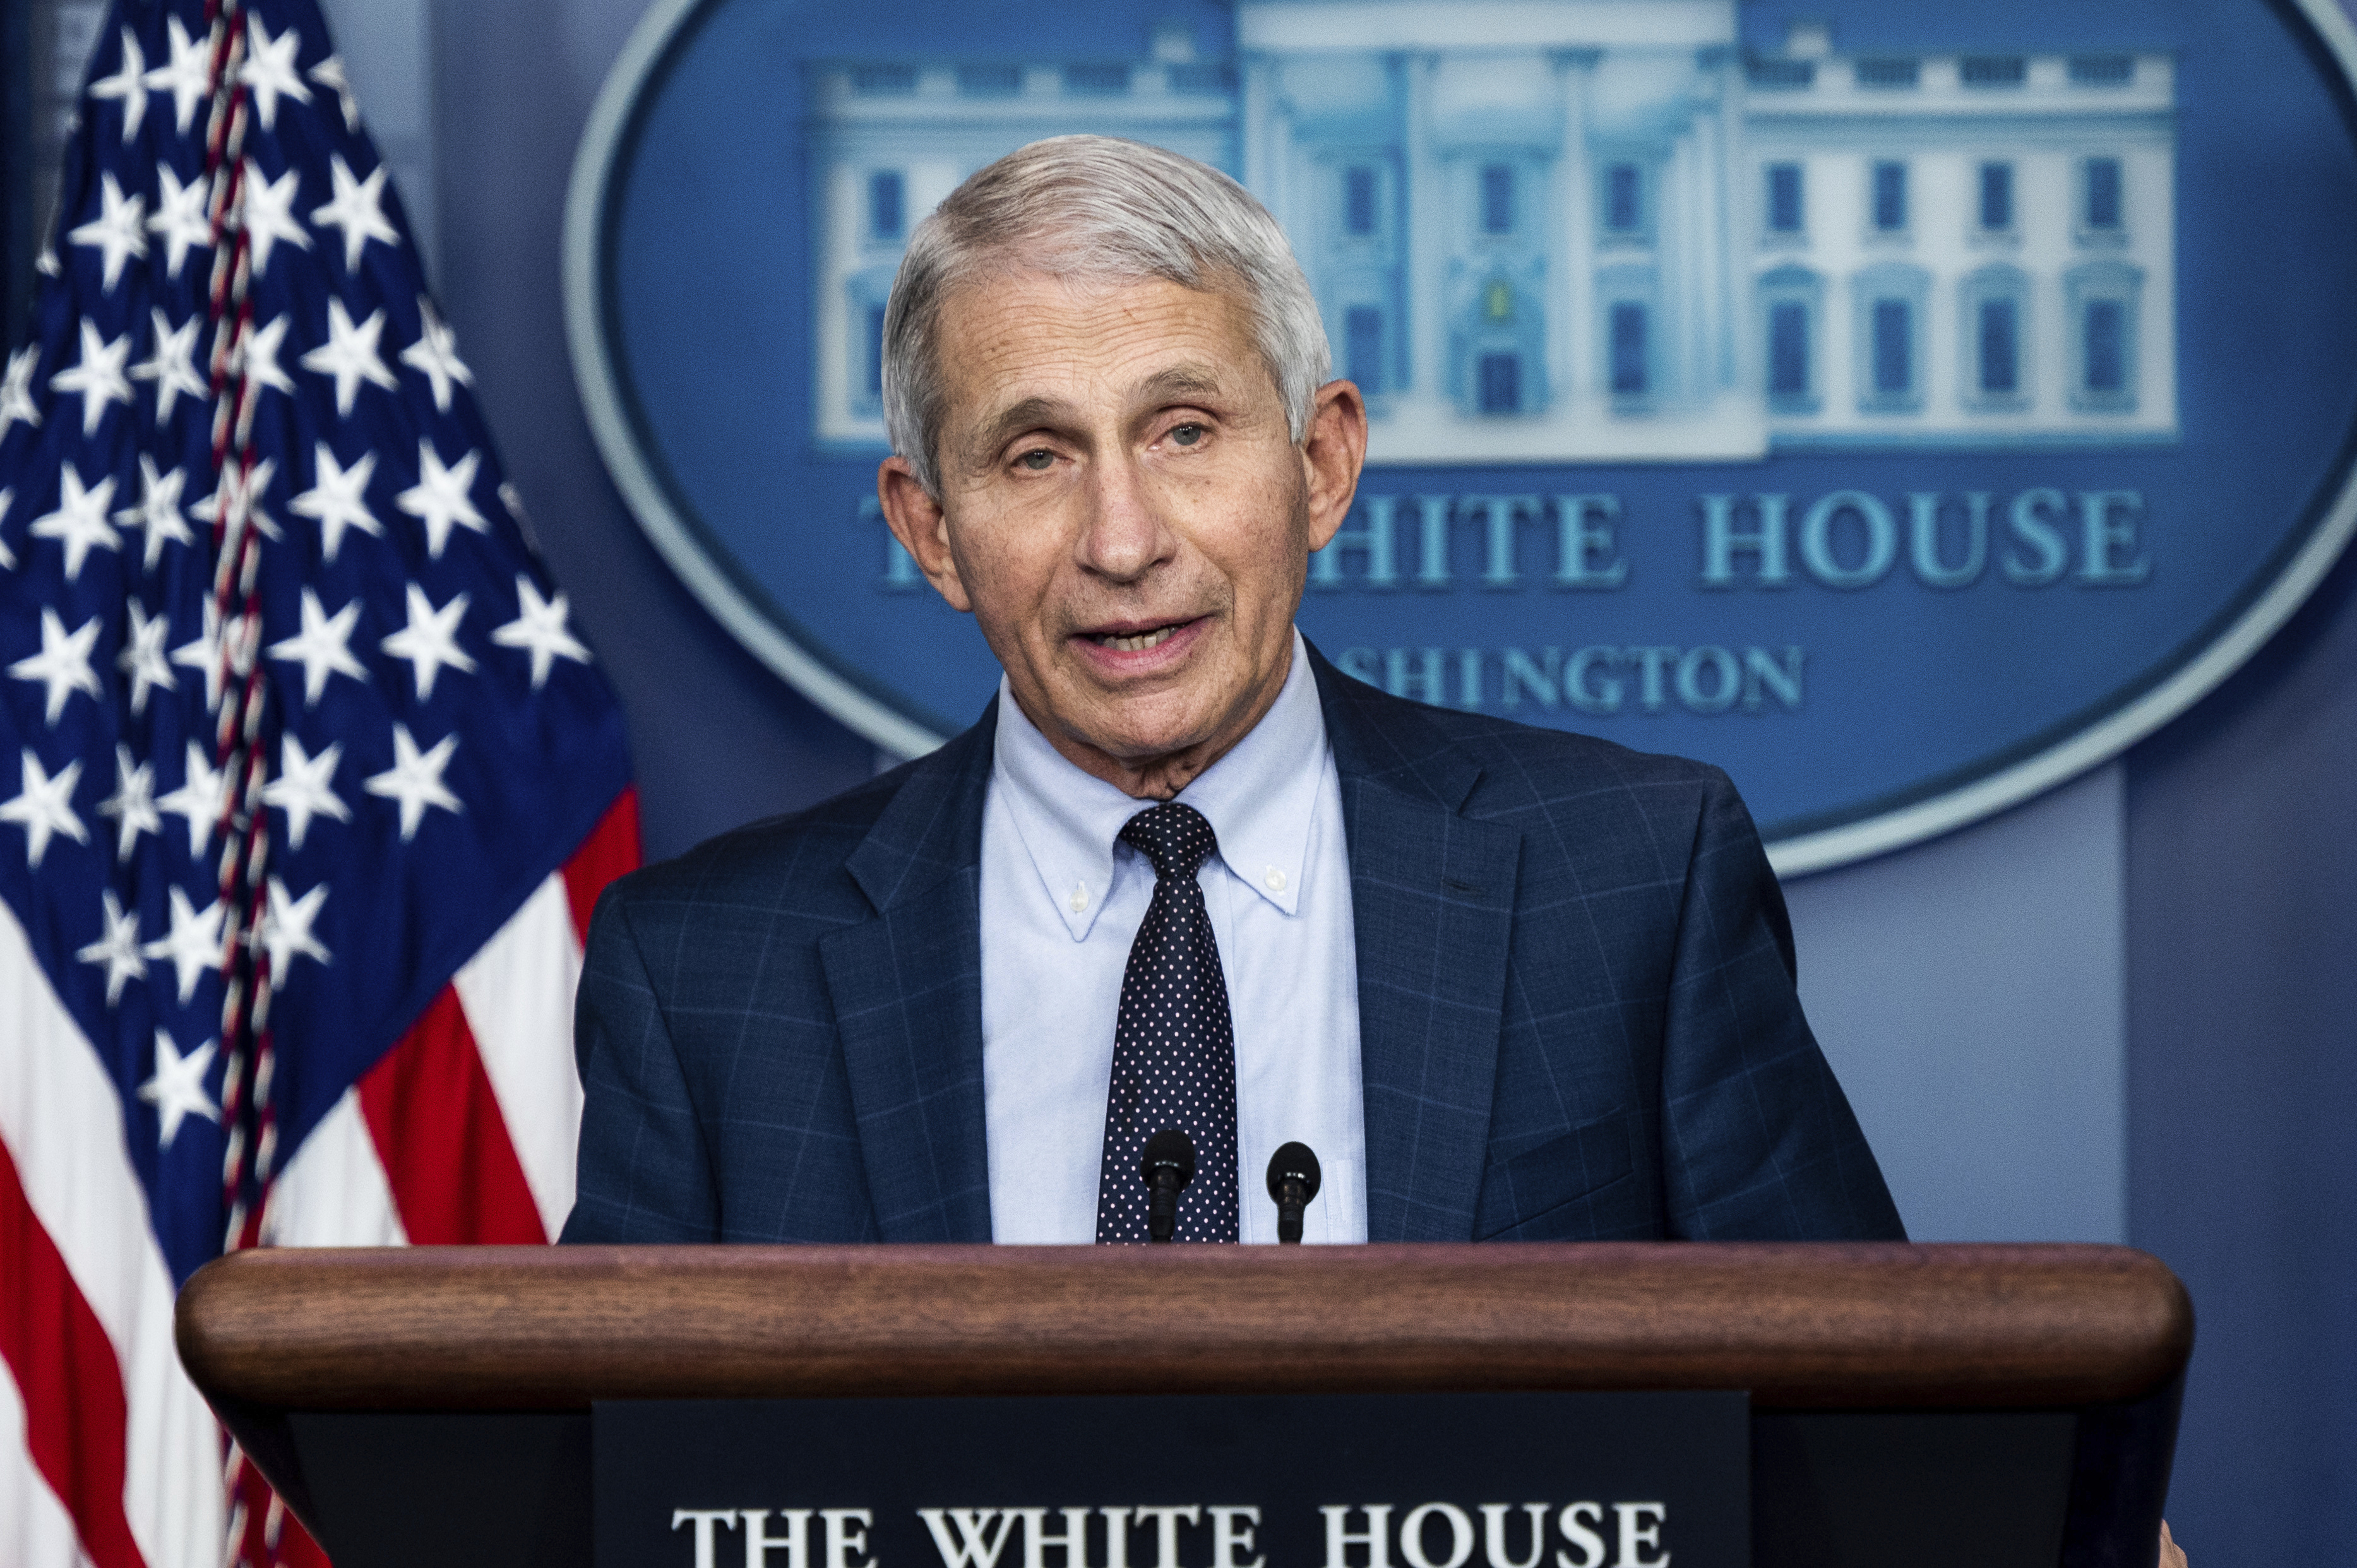 Dr. Anthony Fauci, Director of the National Institute of Allergy and Infectious Diseases, speaking at a press briefing in the White House Press Briefing Room on December 1st 2021.